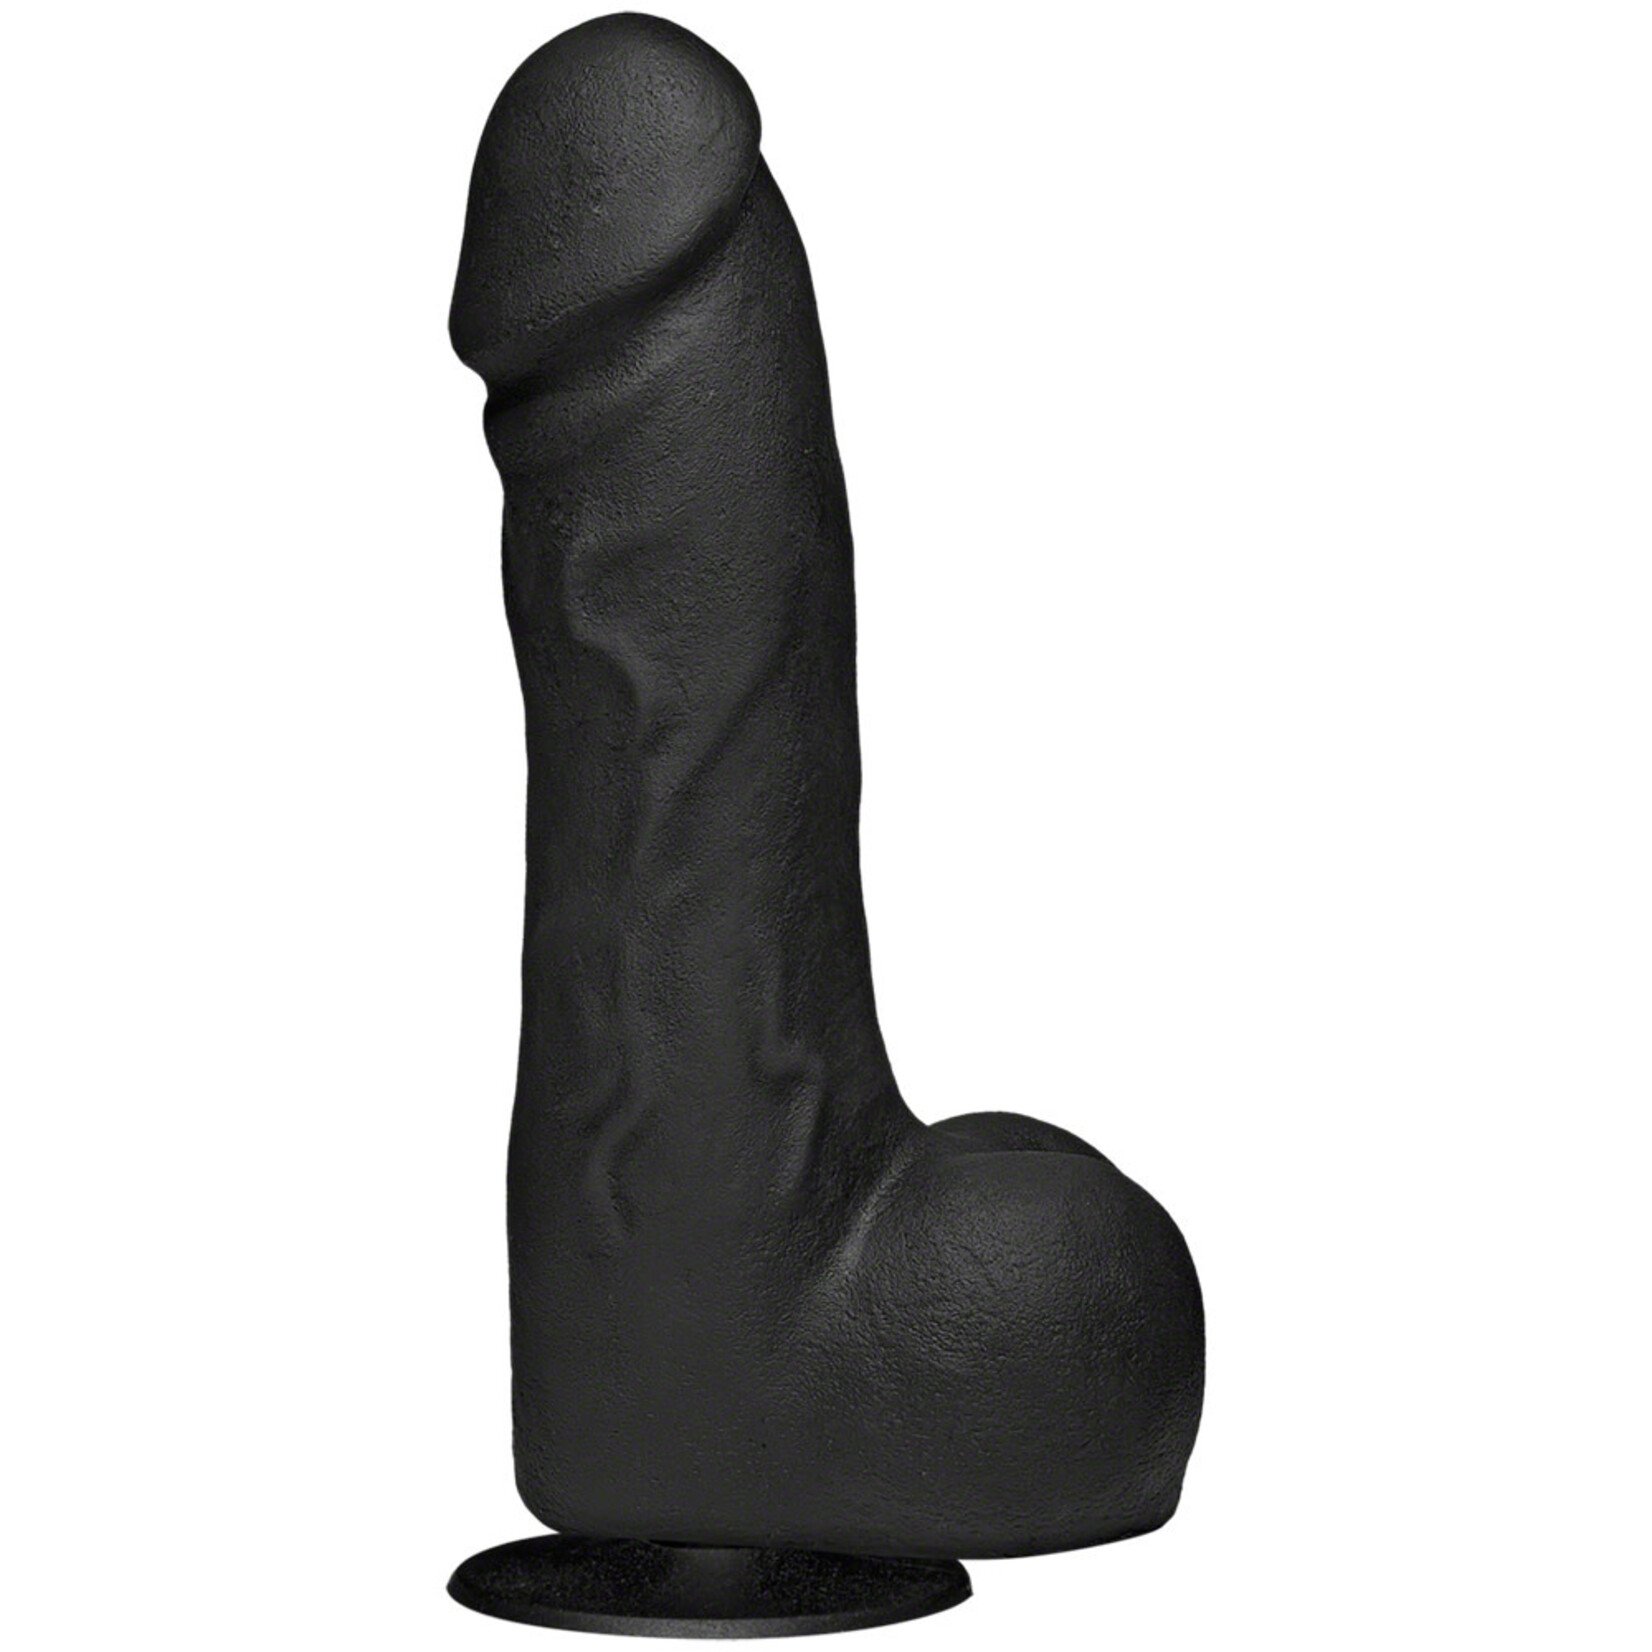 DOC JOHNSON MERCI - THE PERFECT COCK 7.5" WITH REMOVABLE VAC-U-LOCK SUCTION CUP - BLACK